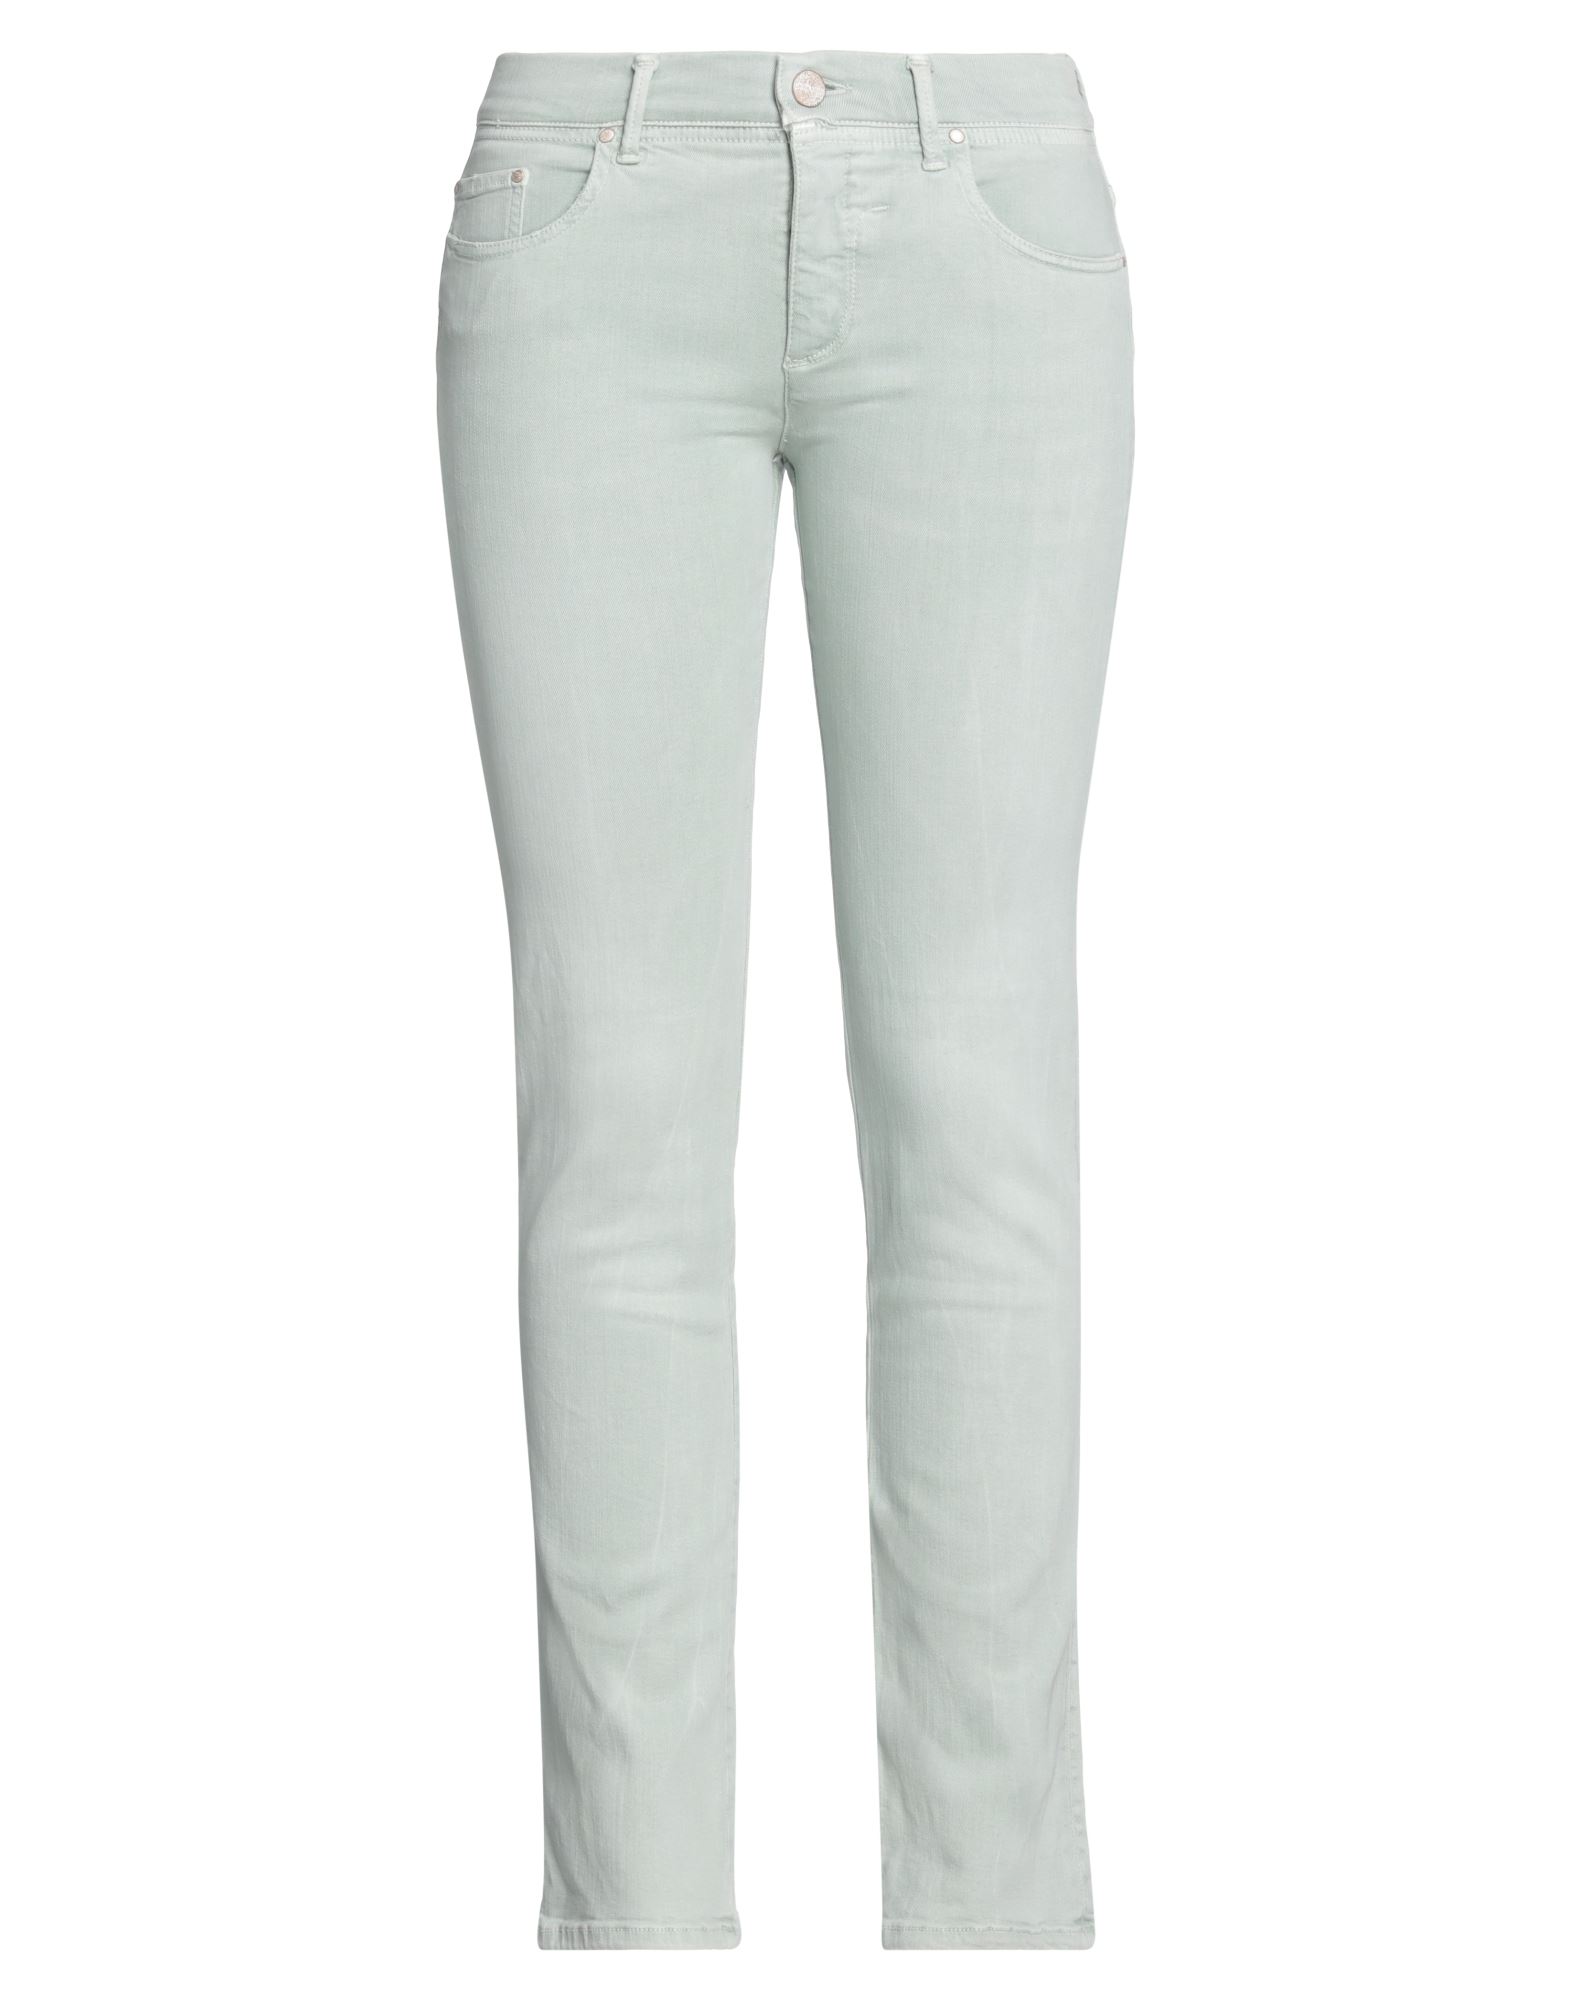 Jacob Cohёn Cropped Pants In Sage Green